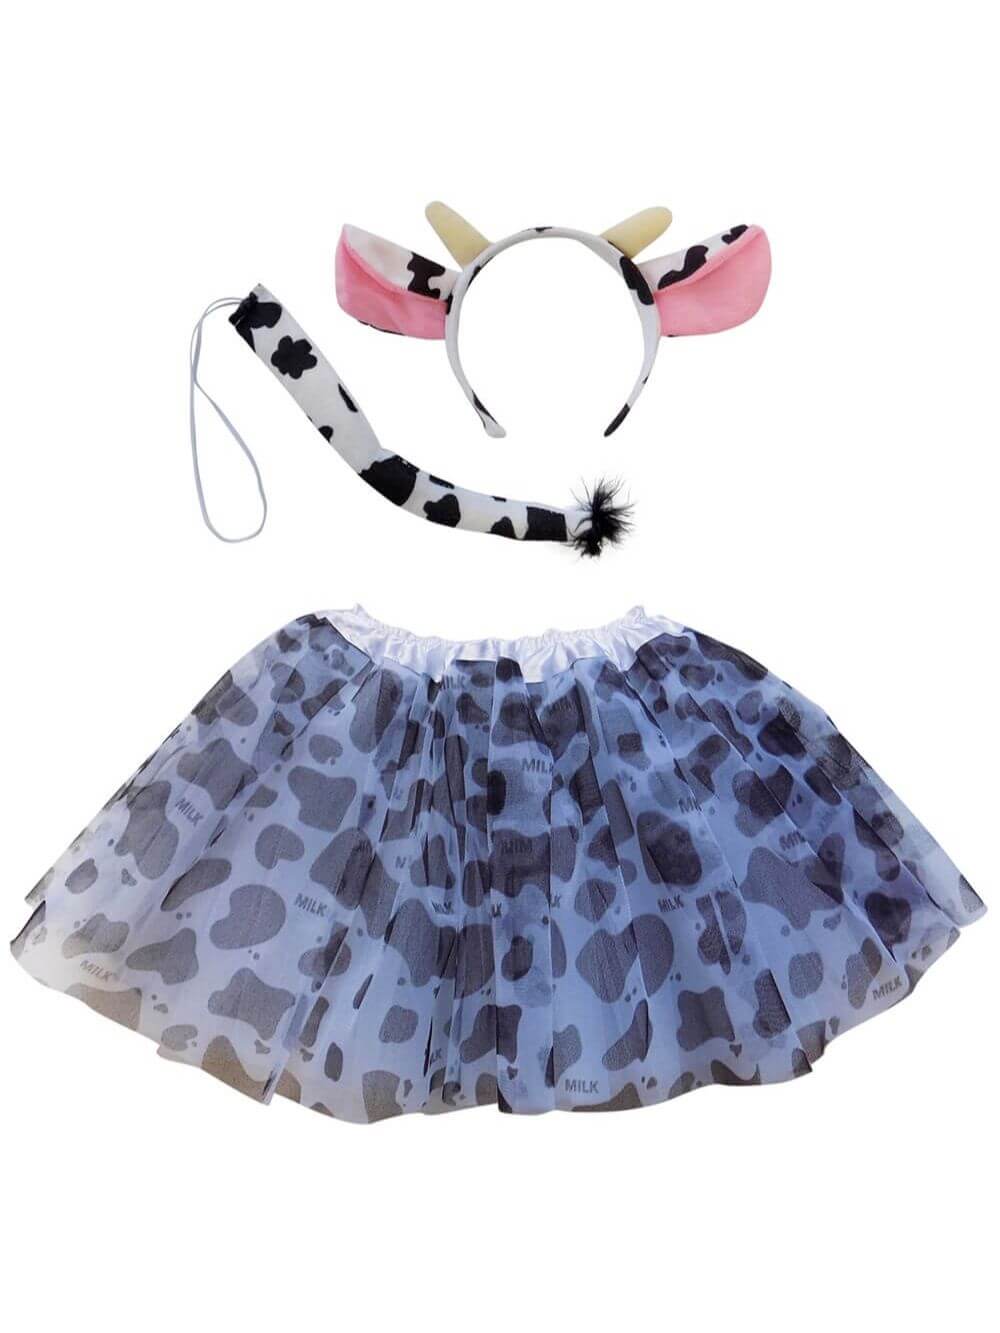 Adult Cow Costume - Tutu Skirt, Tail, & Headband Set for Adult or Plus Size - Sydney So Sweet